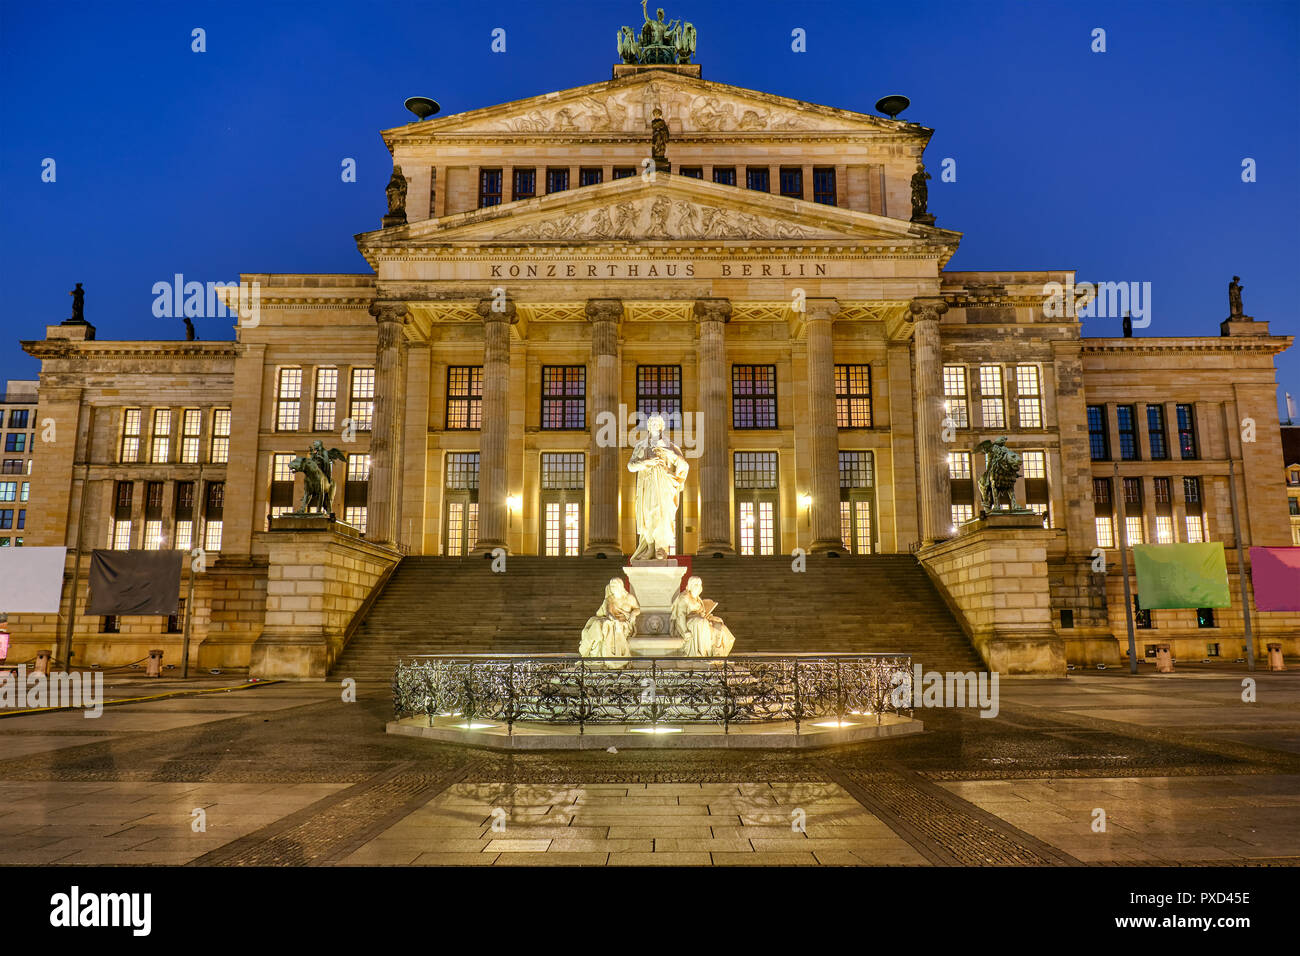 The Concert Hall at the Gendarmenmarkt in Berlin at night Stock Photo